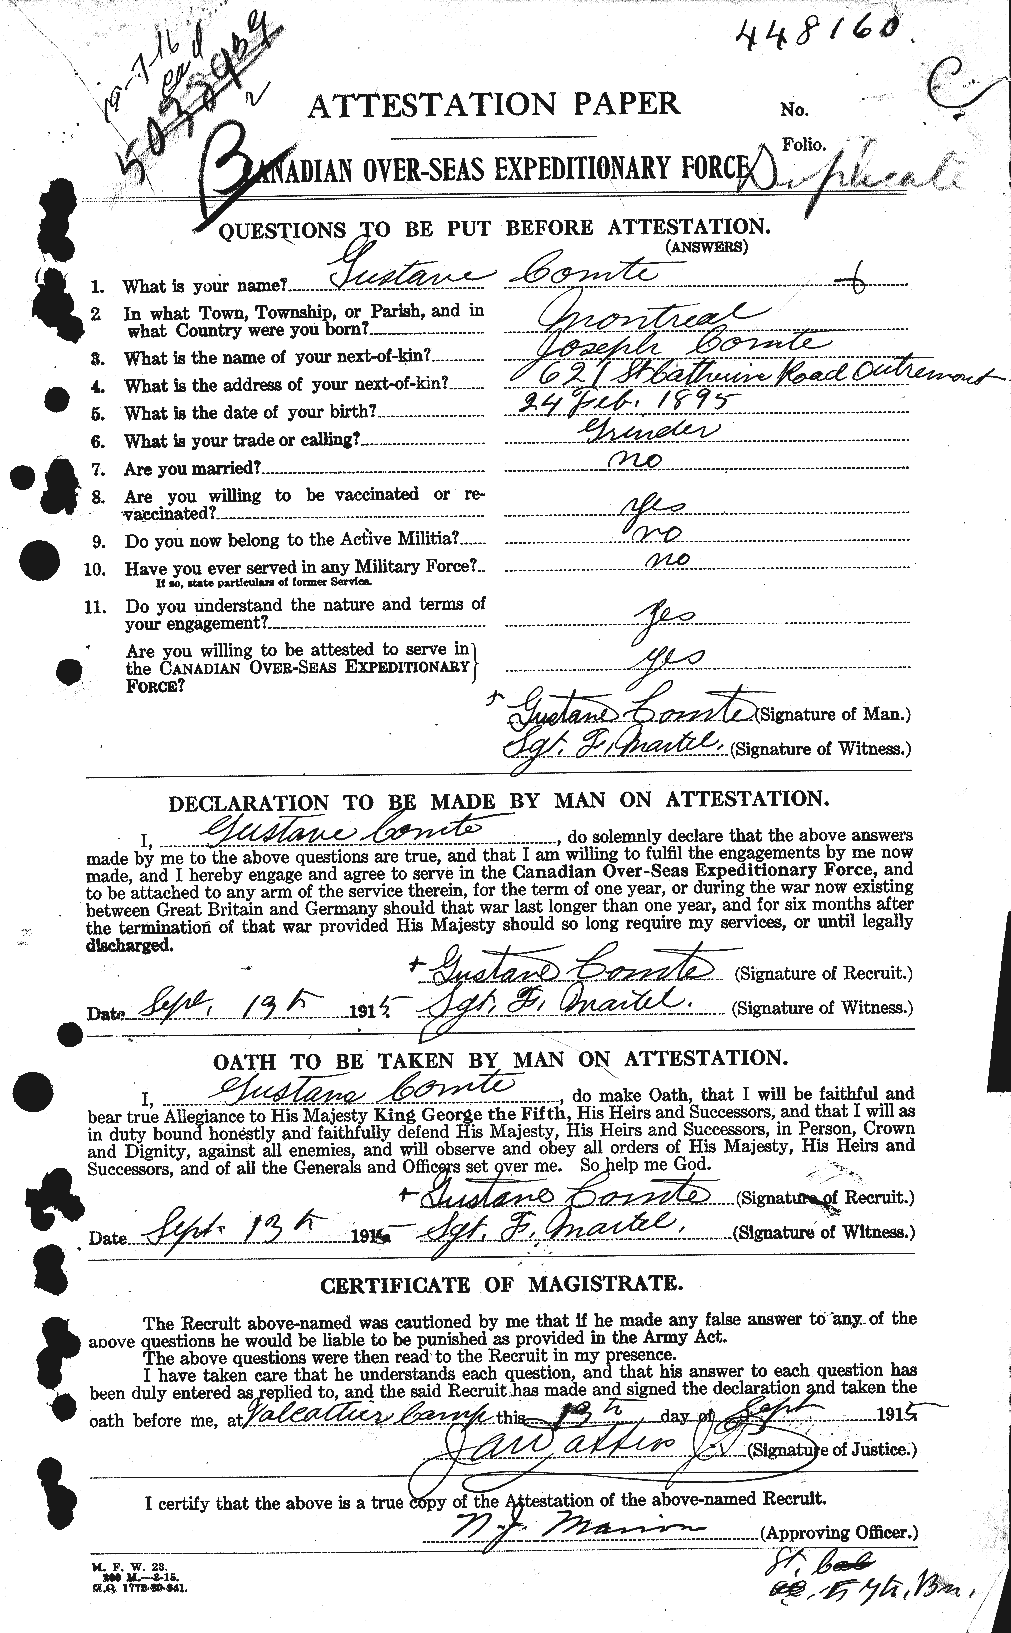 Personnel Records of the First World War - CEF 068172a